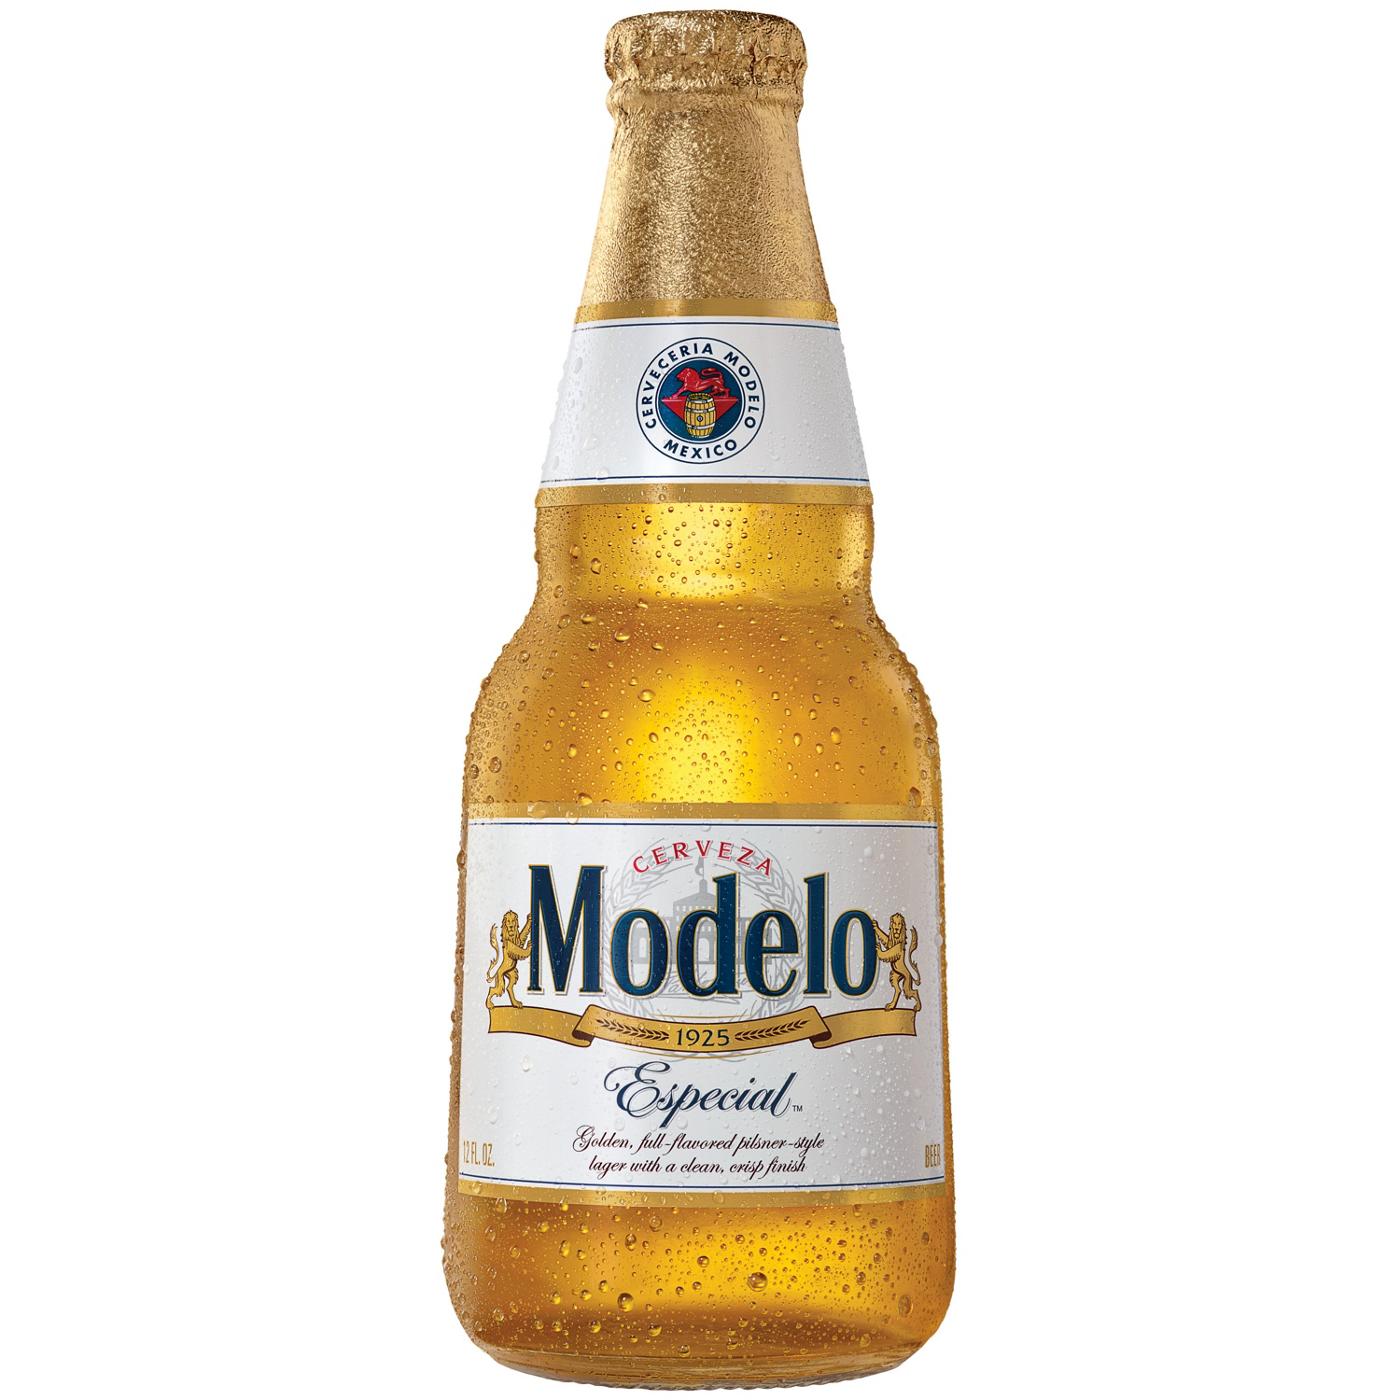 Modelo Especial Mexican Lager Import Beer 12 oz Bottles, 12 pk; image 10 of 10